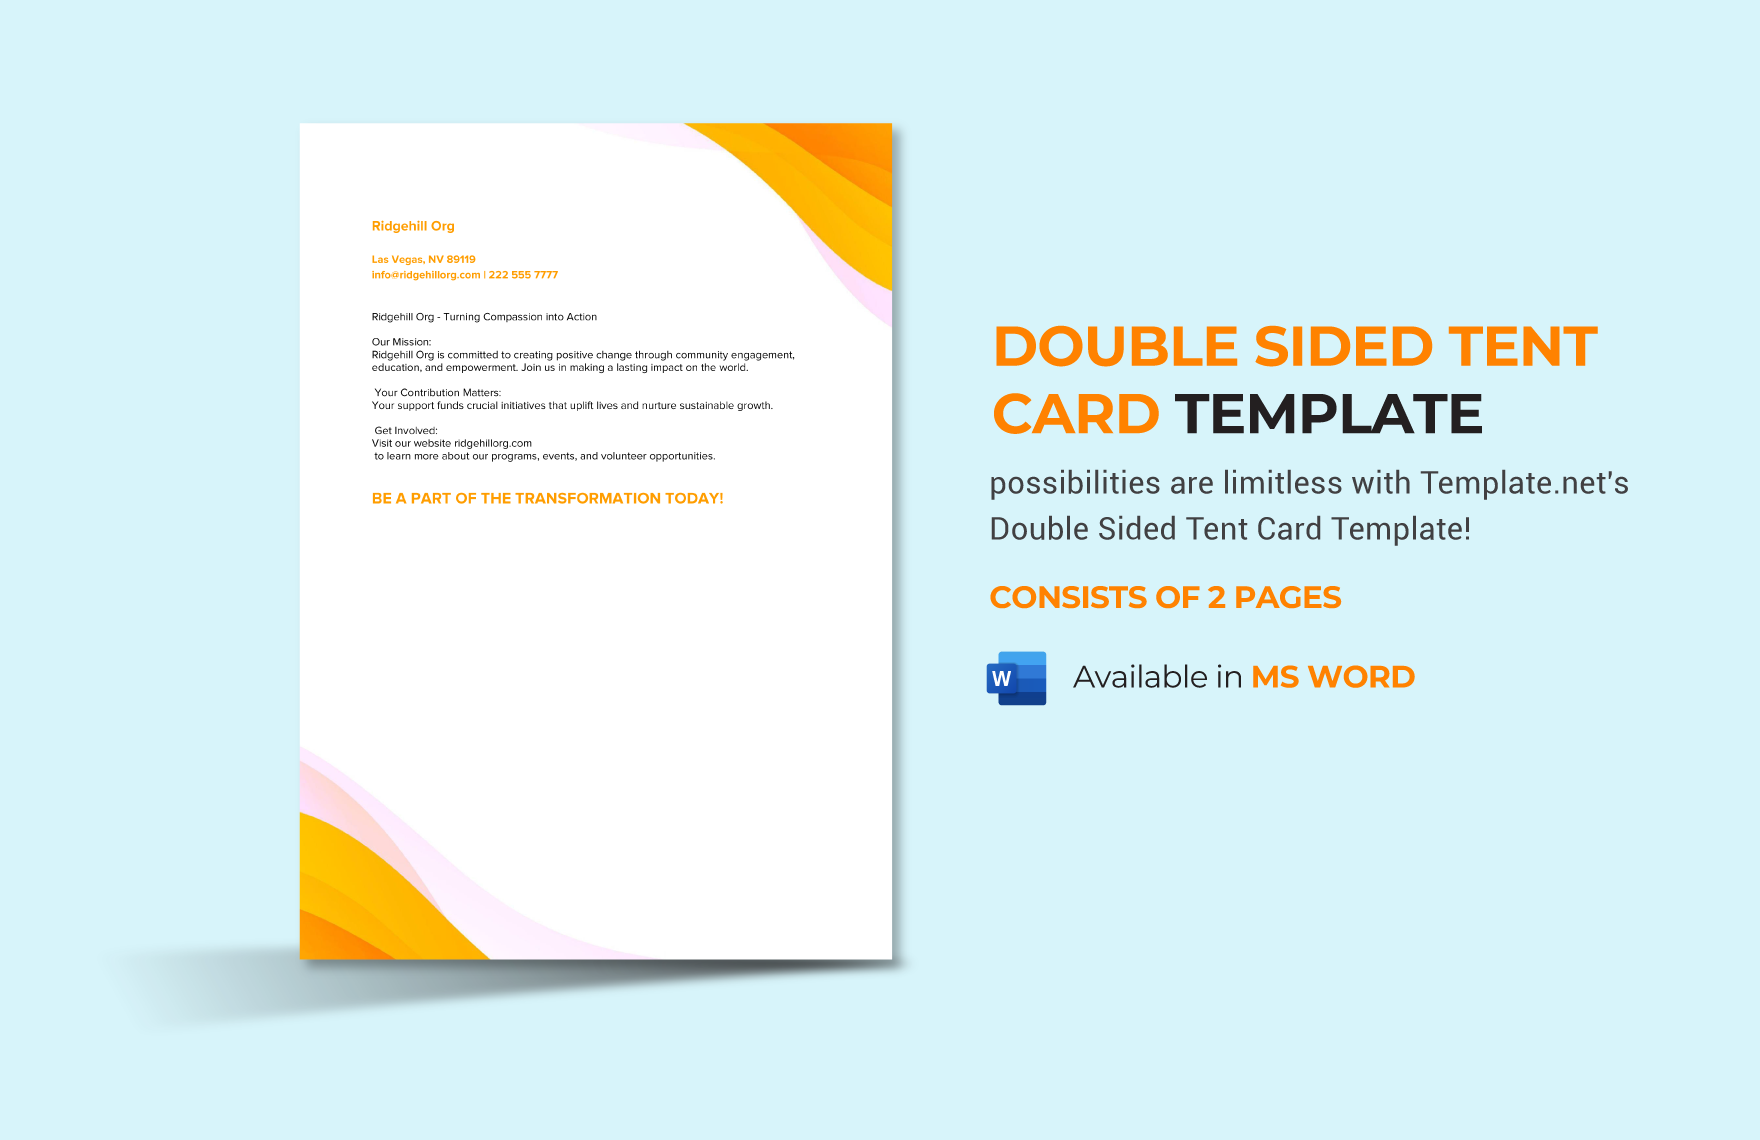 Double Sided Tent Card Template in Word